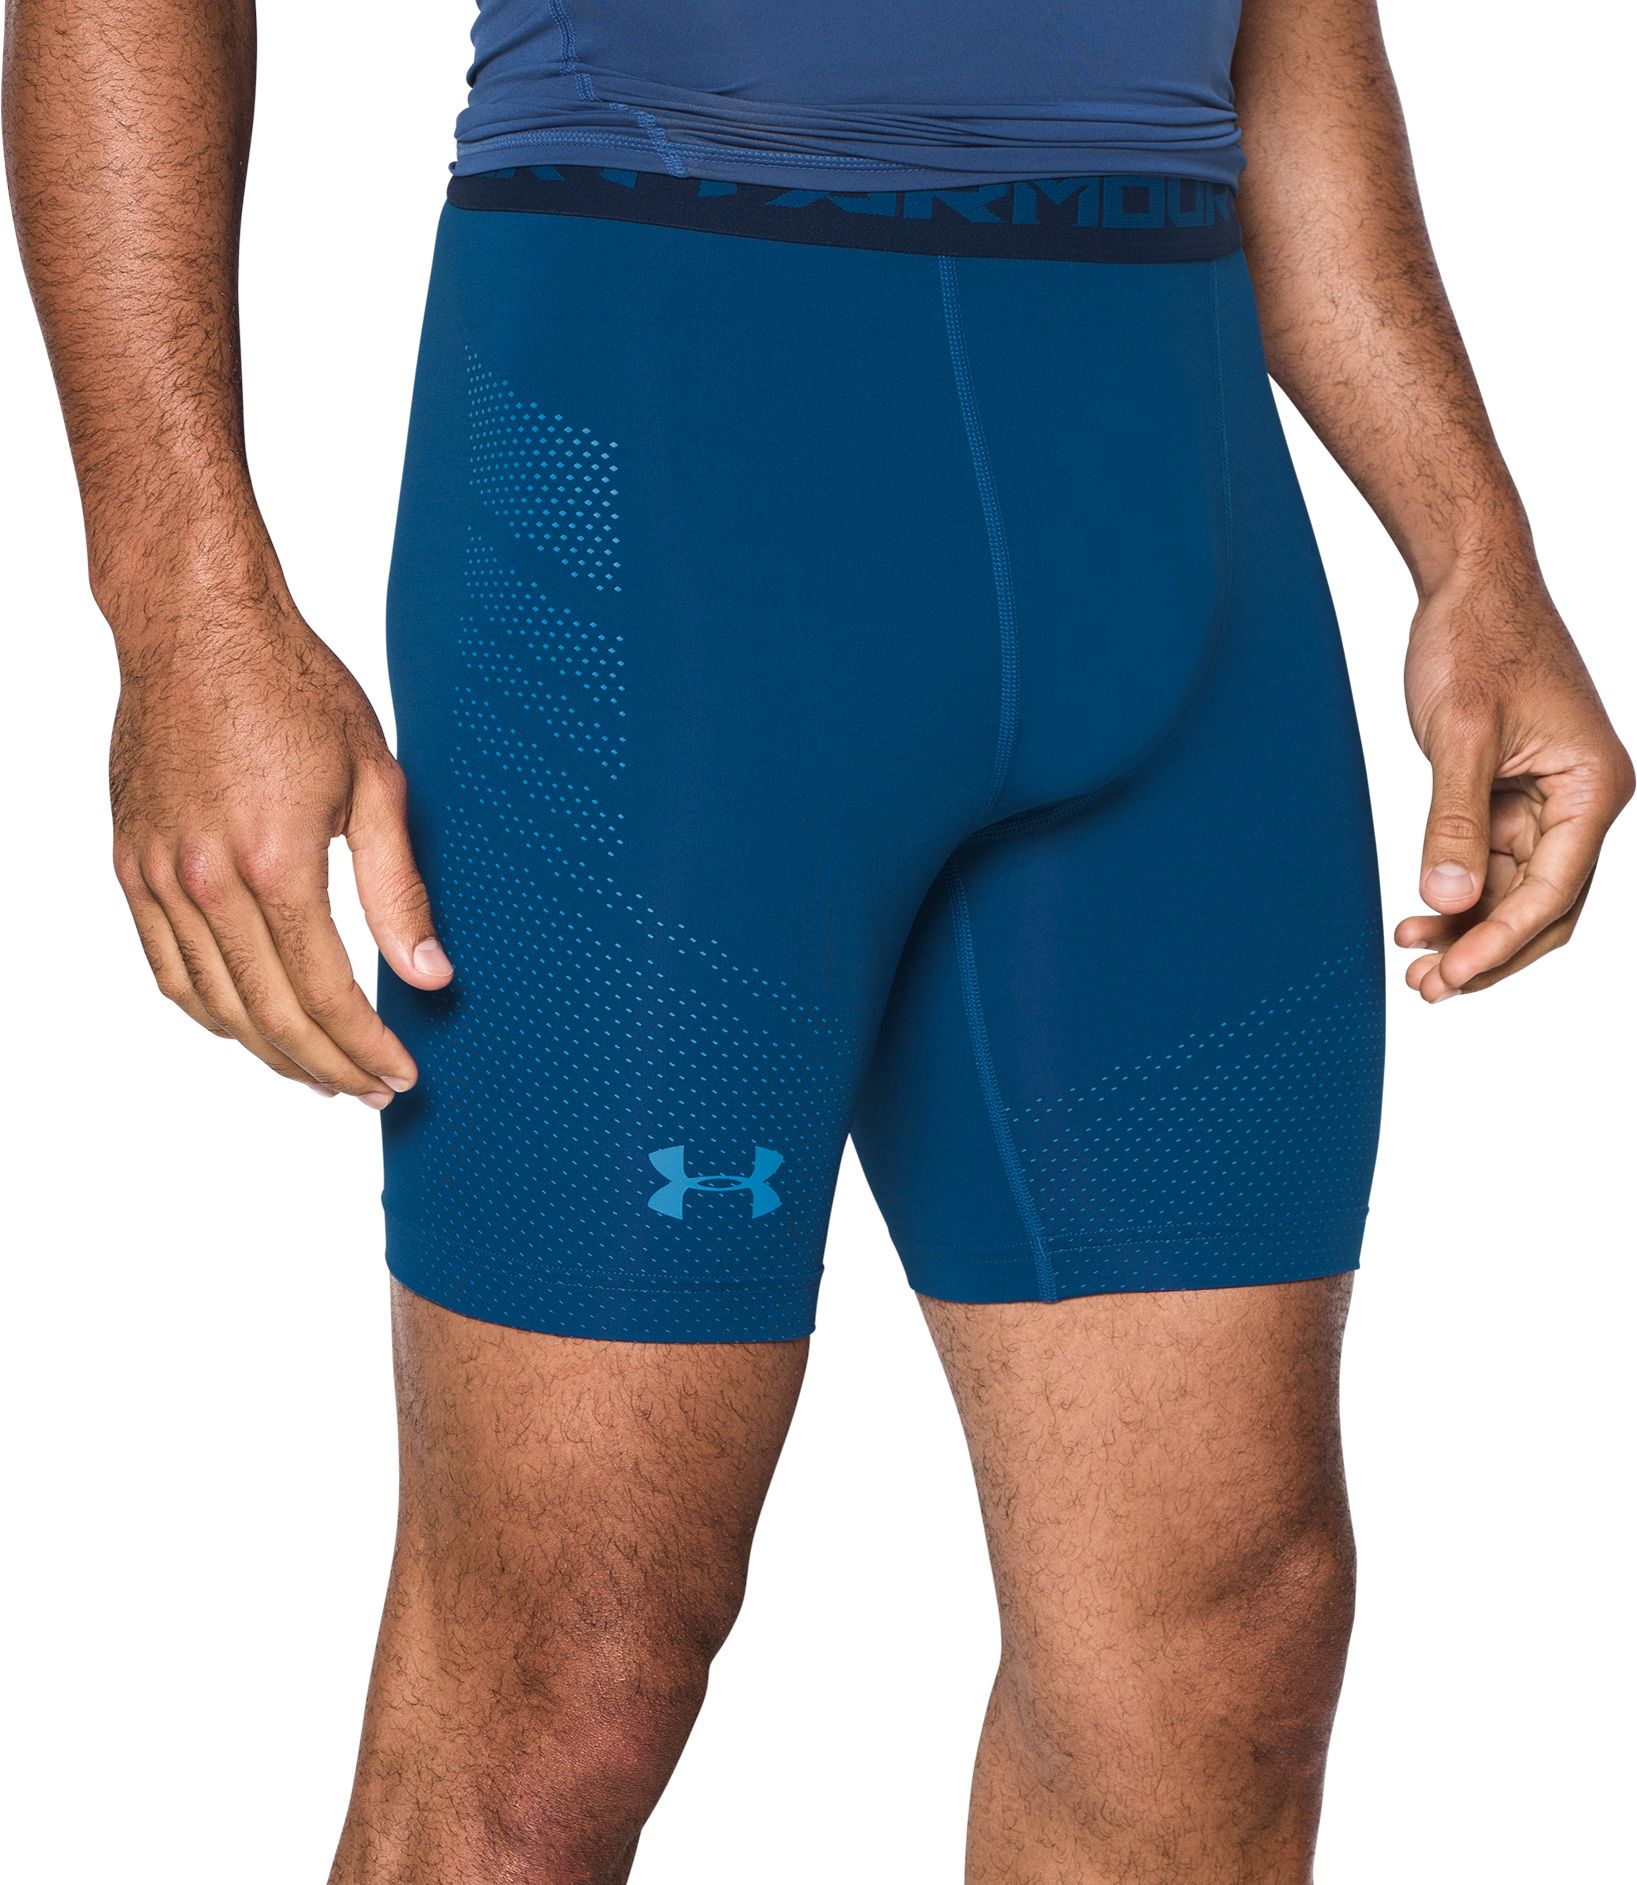 Men's Compression Shorts | DICK'S Sporting Goods